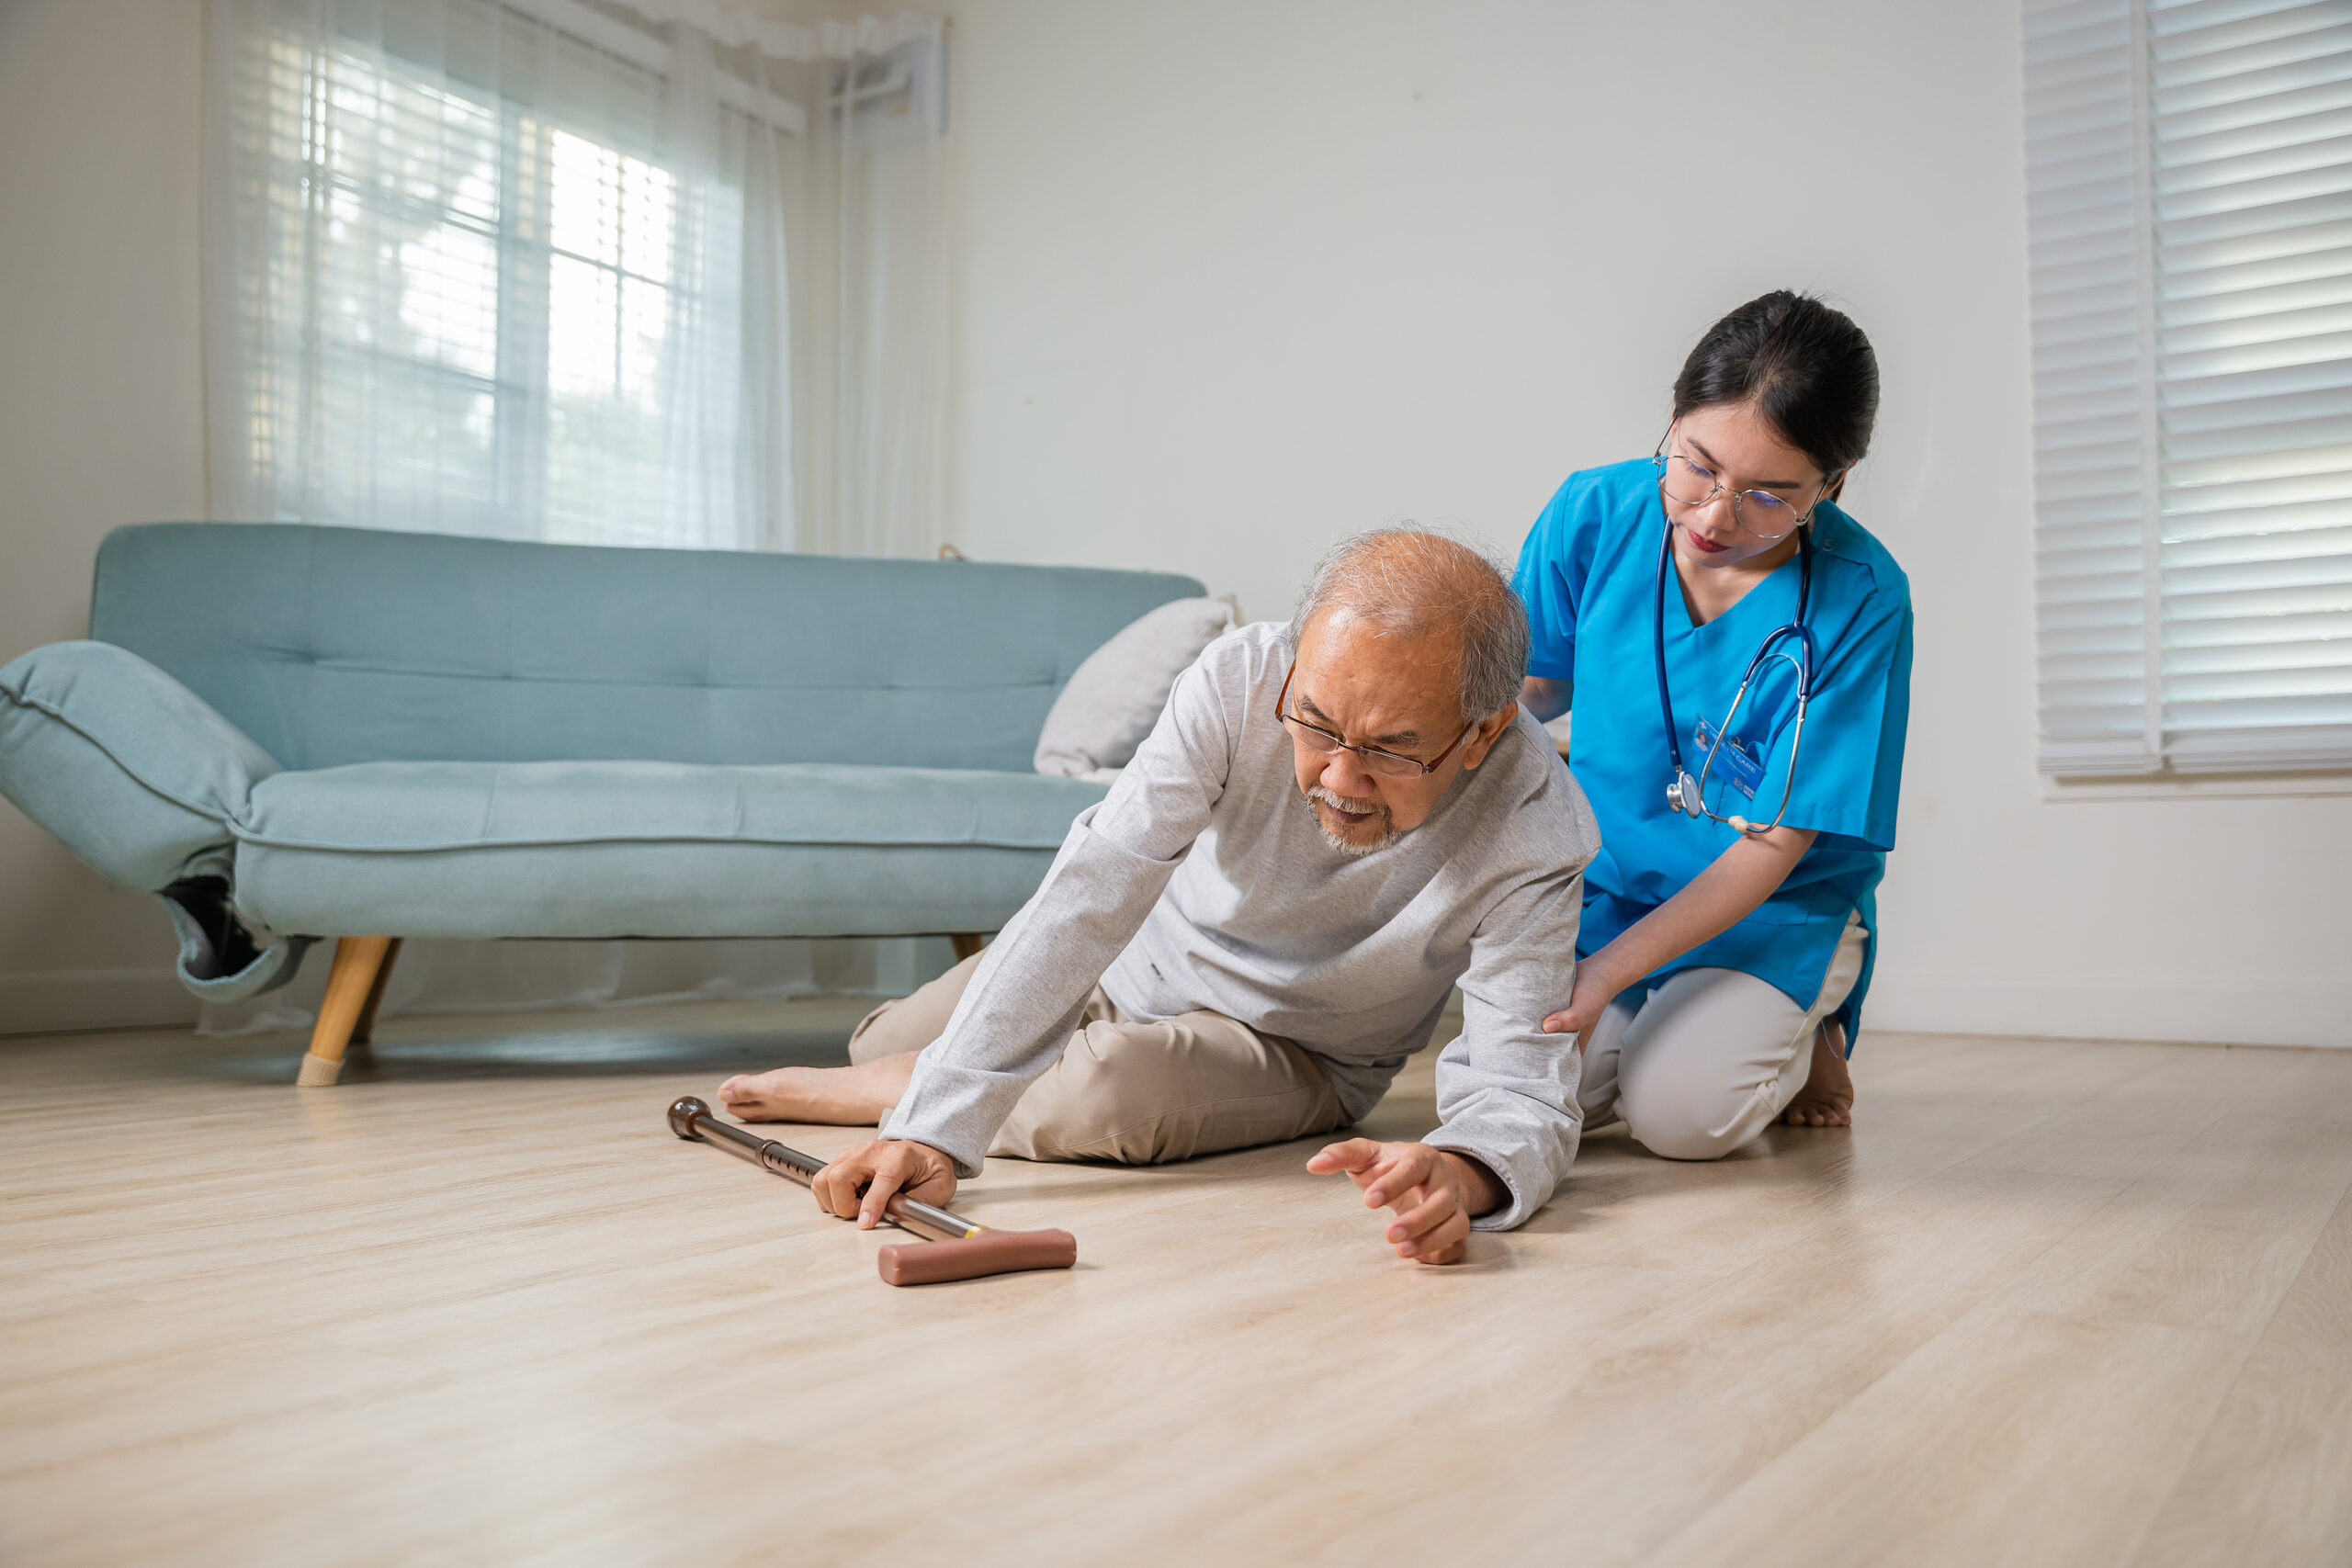 Healthcare Industry – Back/Lifting Injuries for Nursing Home Workers